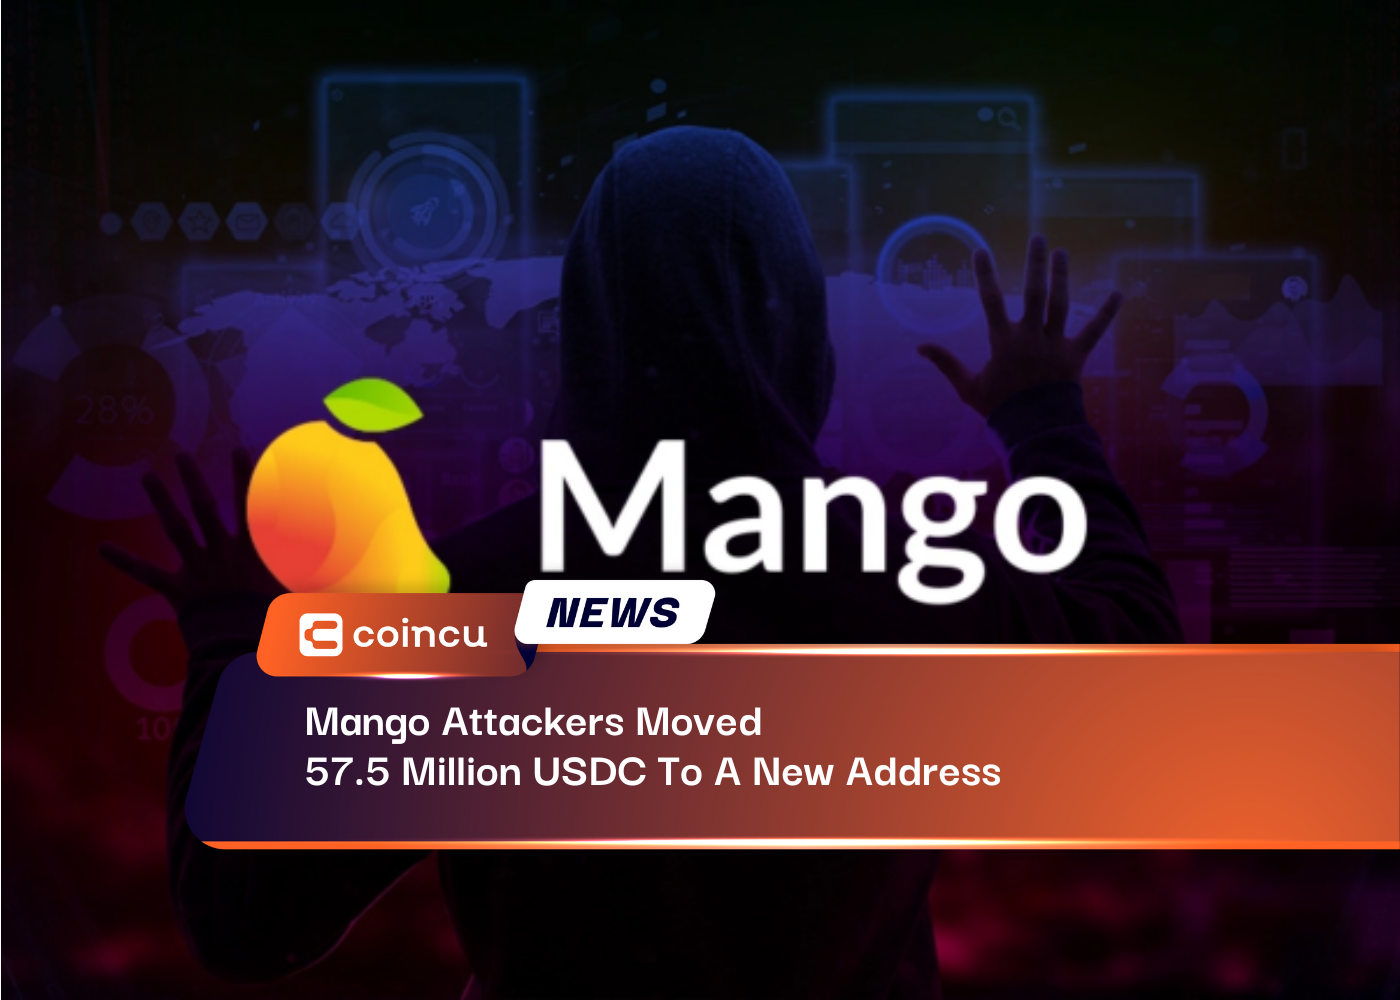 Mango Attackers Moved 57.5 Million USDC To A New Address